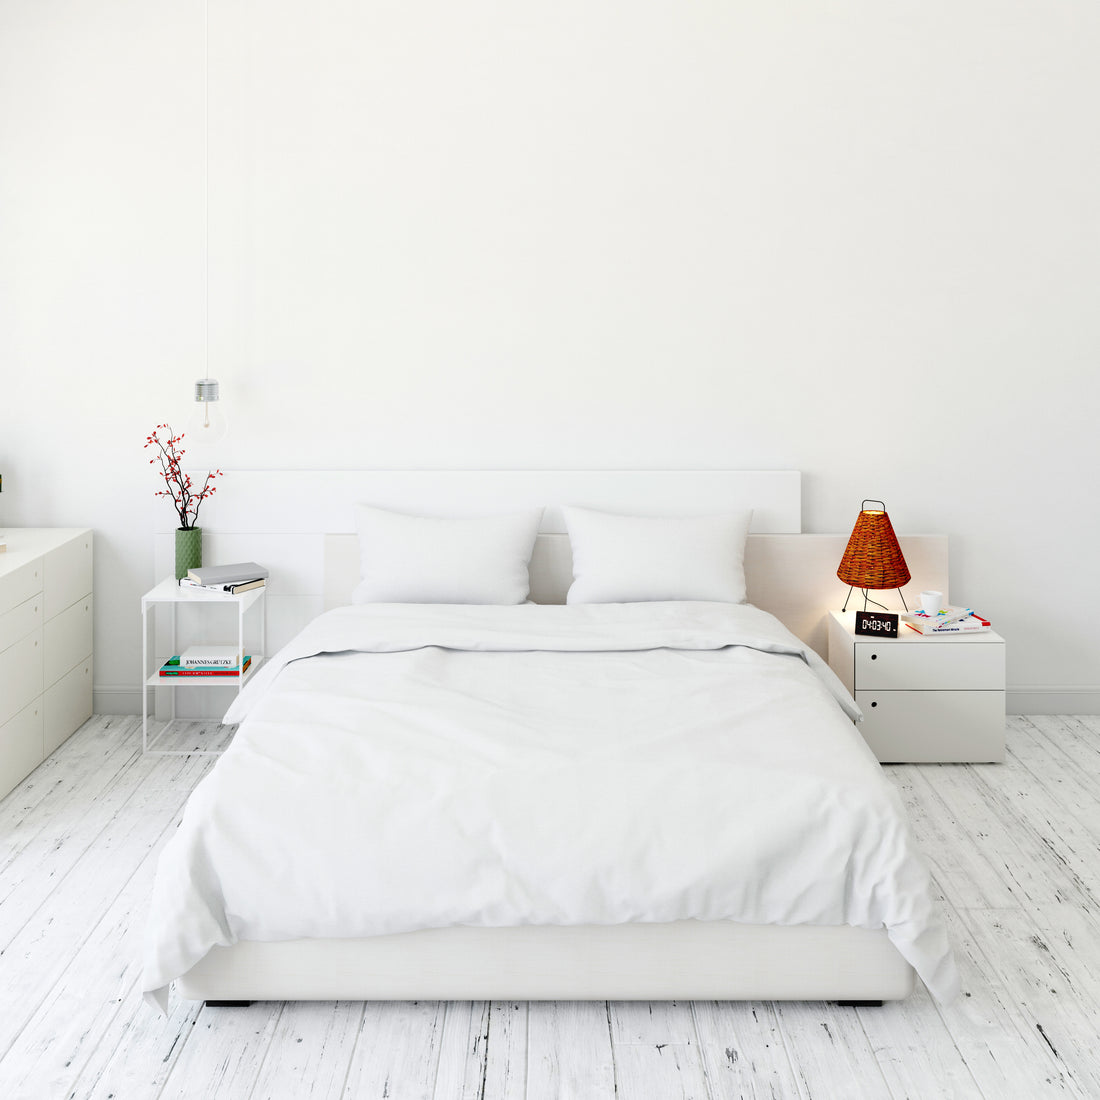 Choosing the Perfect Mattress for Your Singapore Home: Pocketed Spring vs. Bonnell Spring"